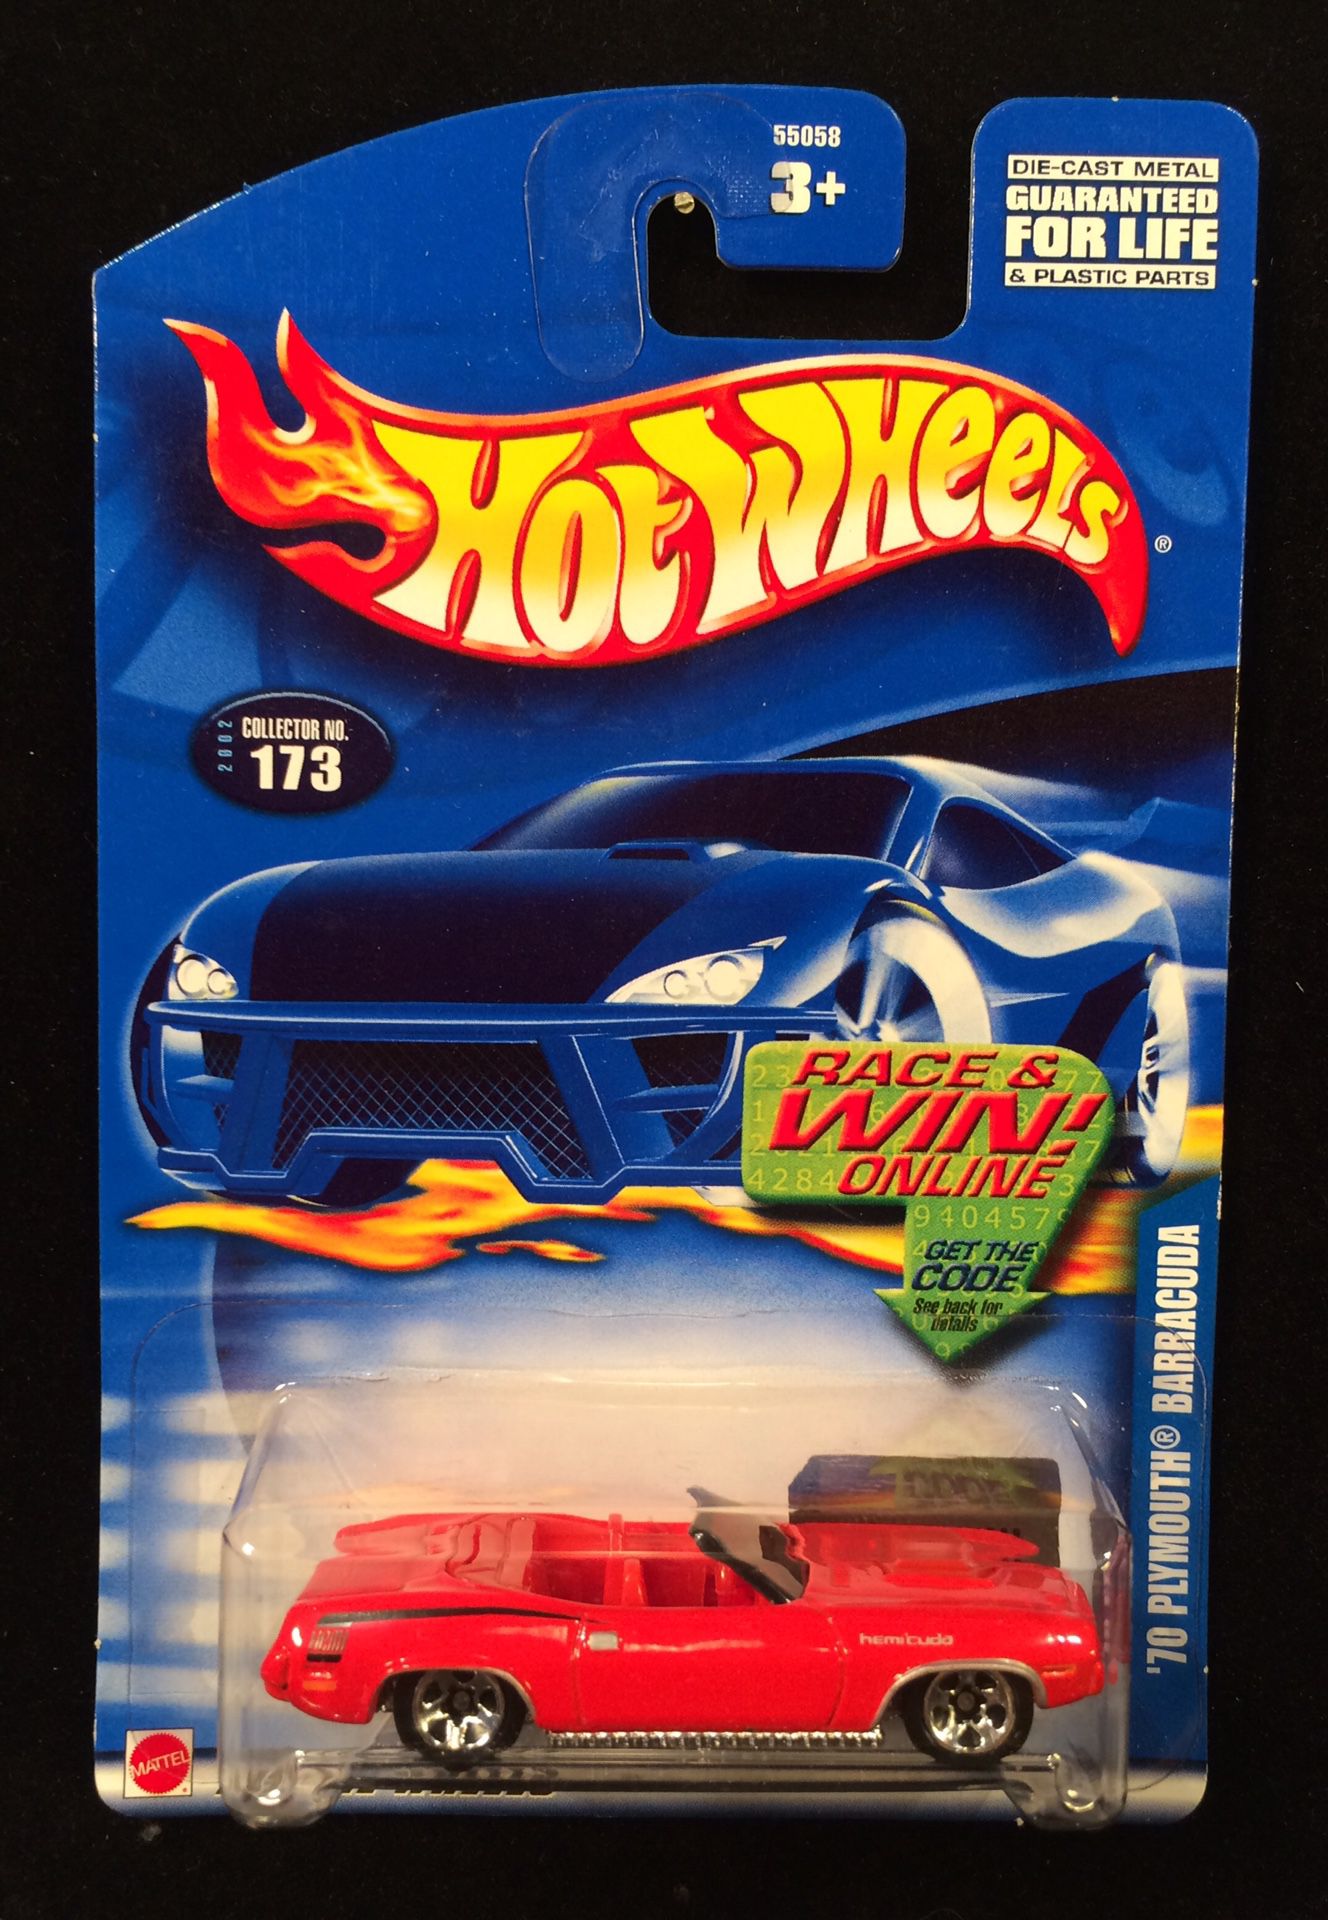 Hot Wheels ‘70 Plymouth Barracuda • 2002 Collector Number 173 • Red on Red